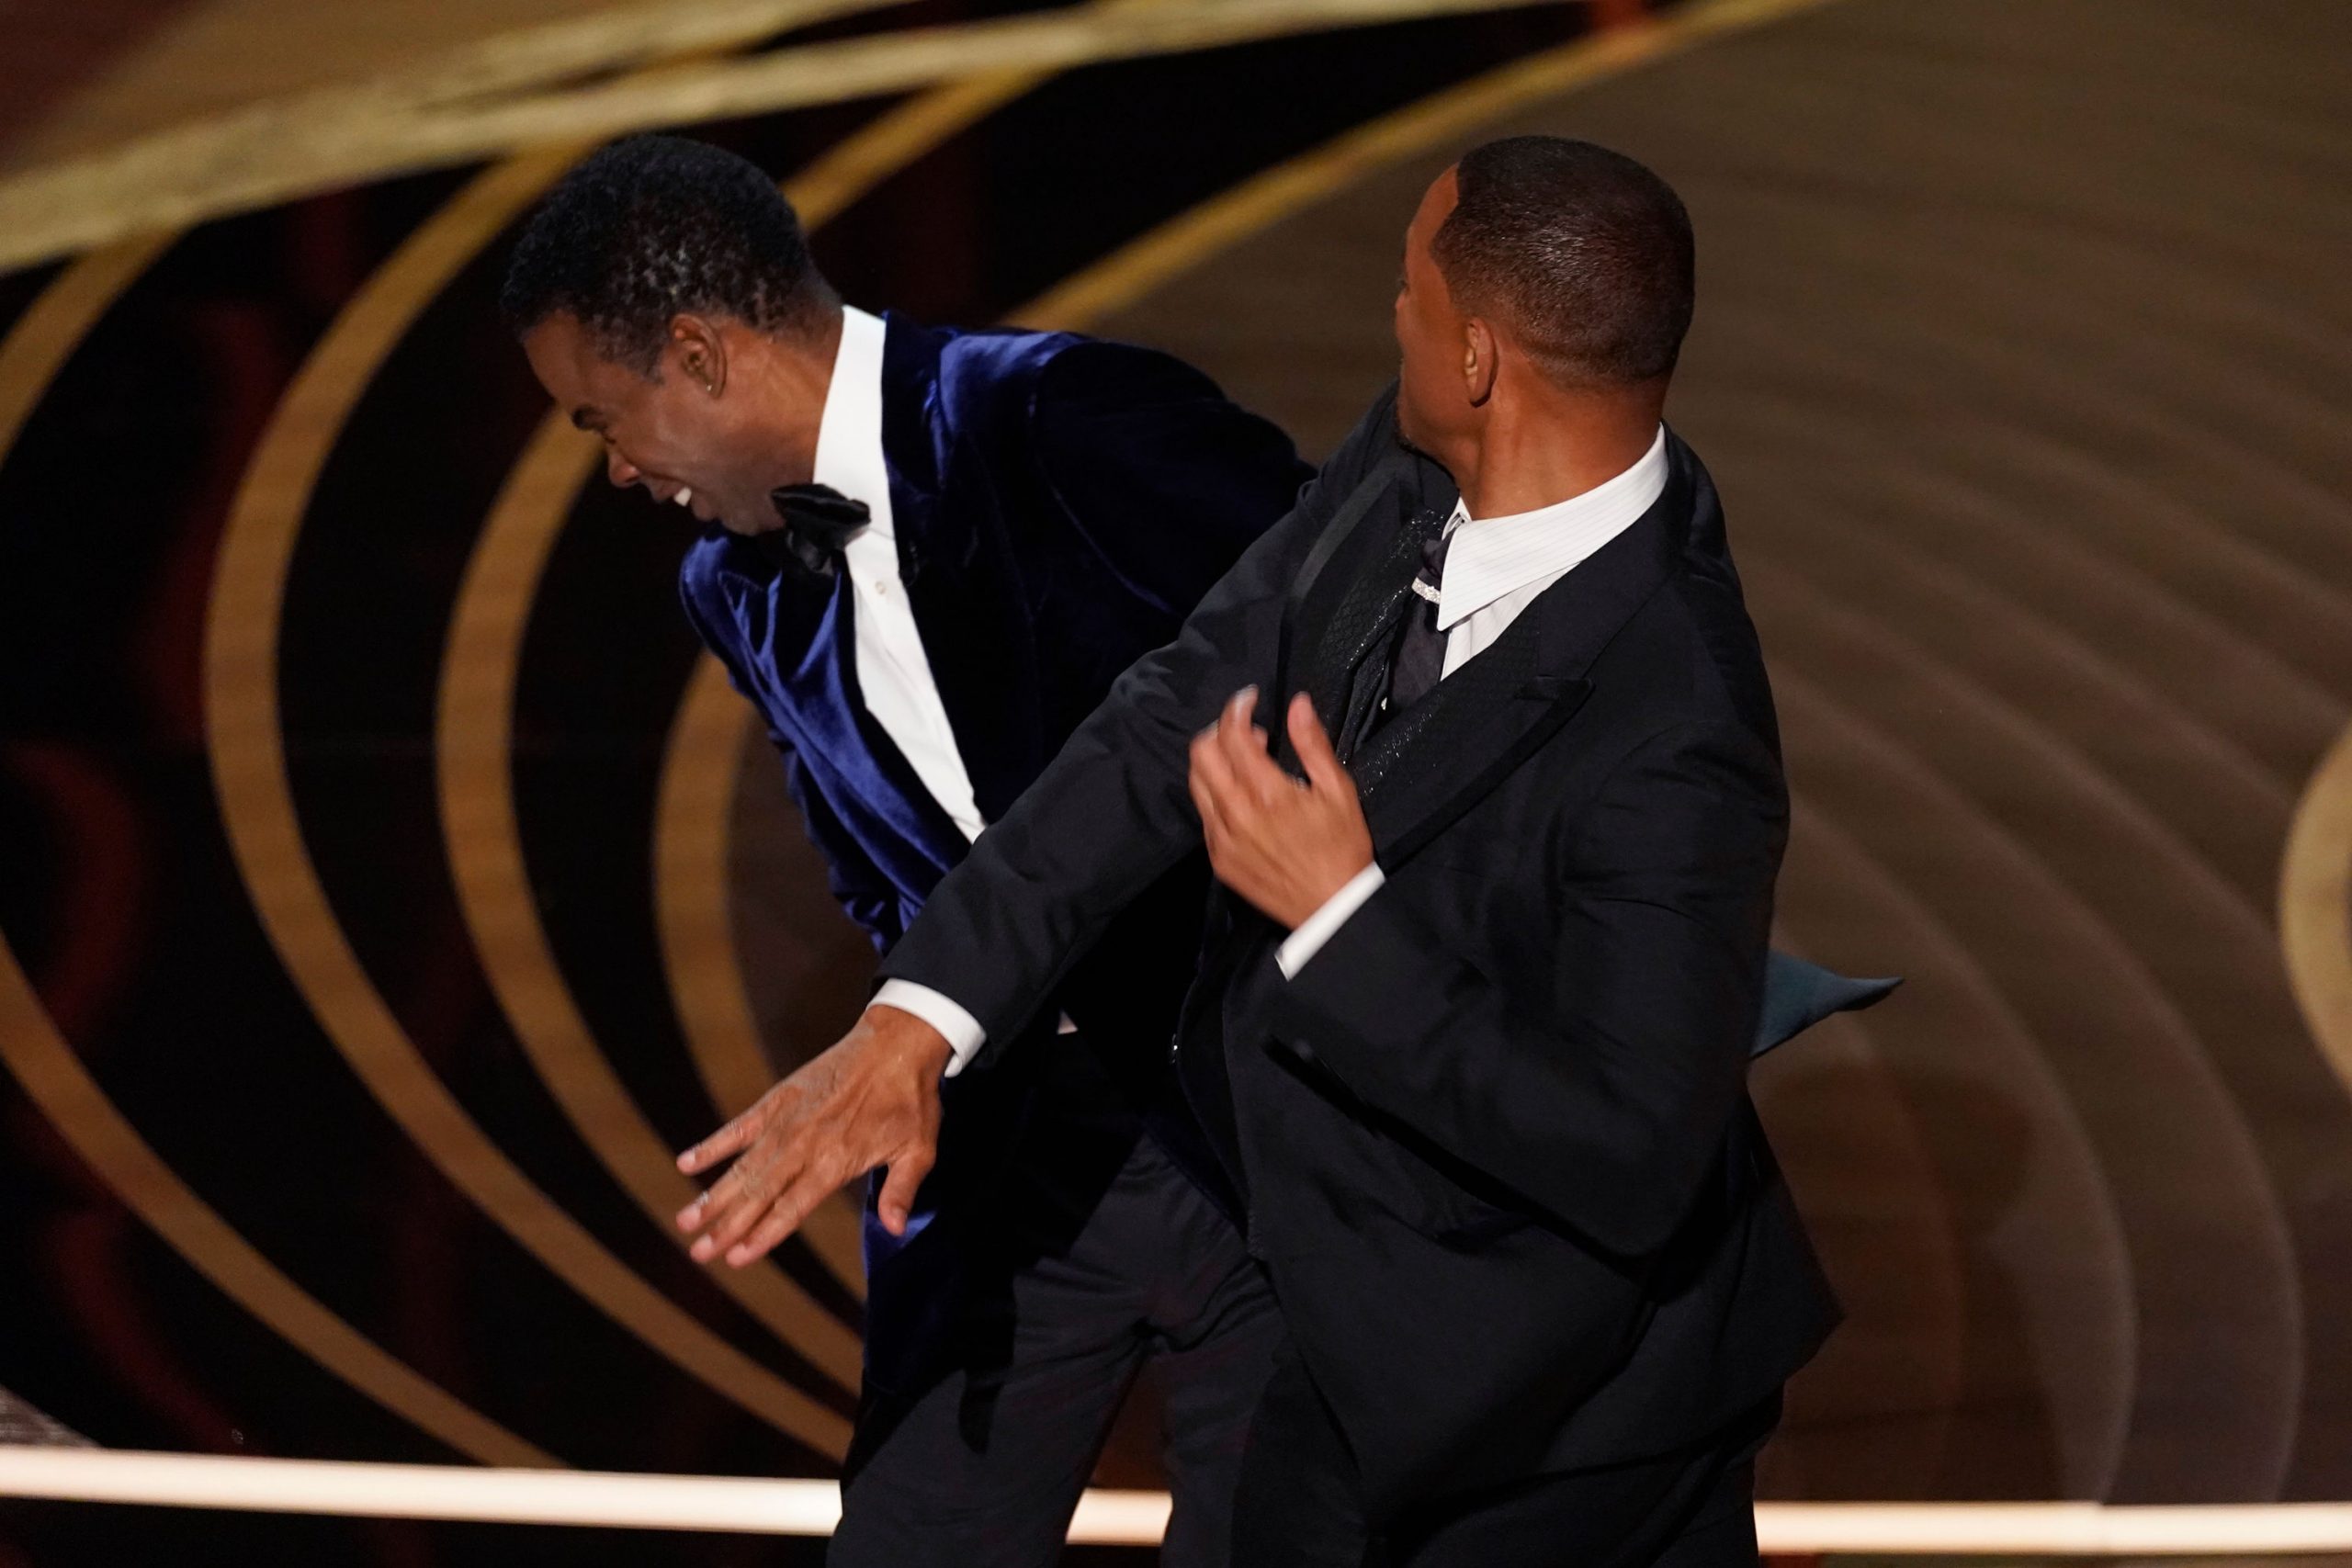 Chris Rock tells LAPD he doesn’t want to report Will Smith over Oscars slap incident